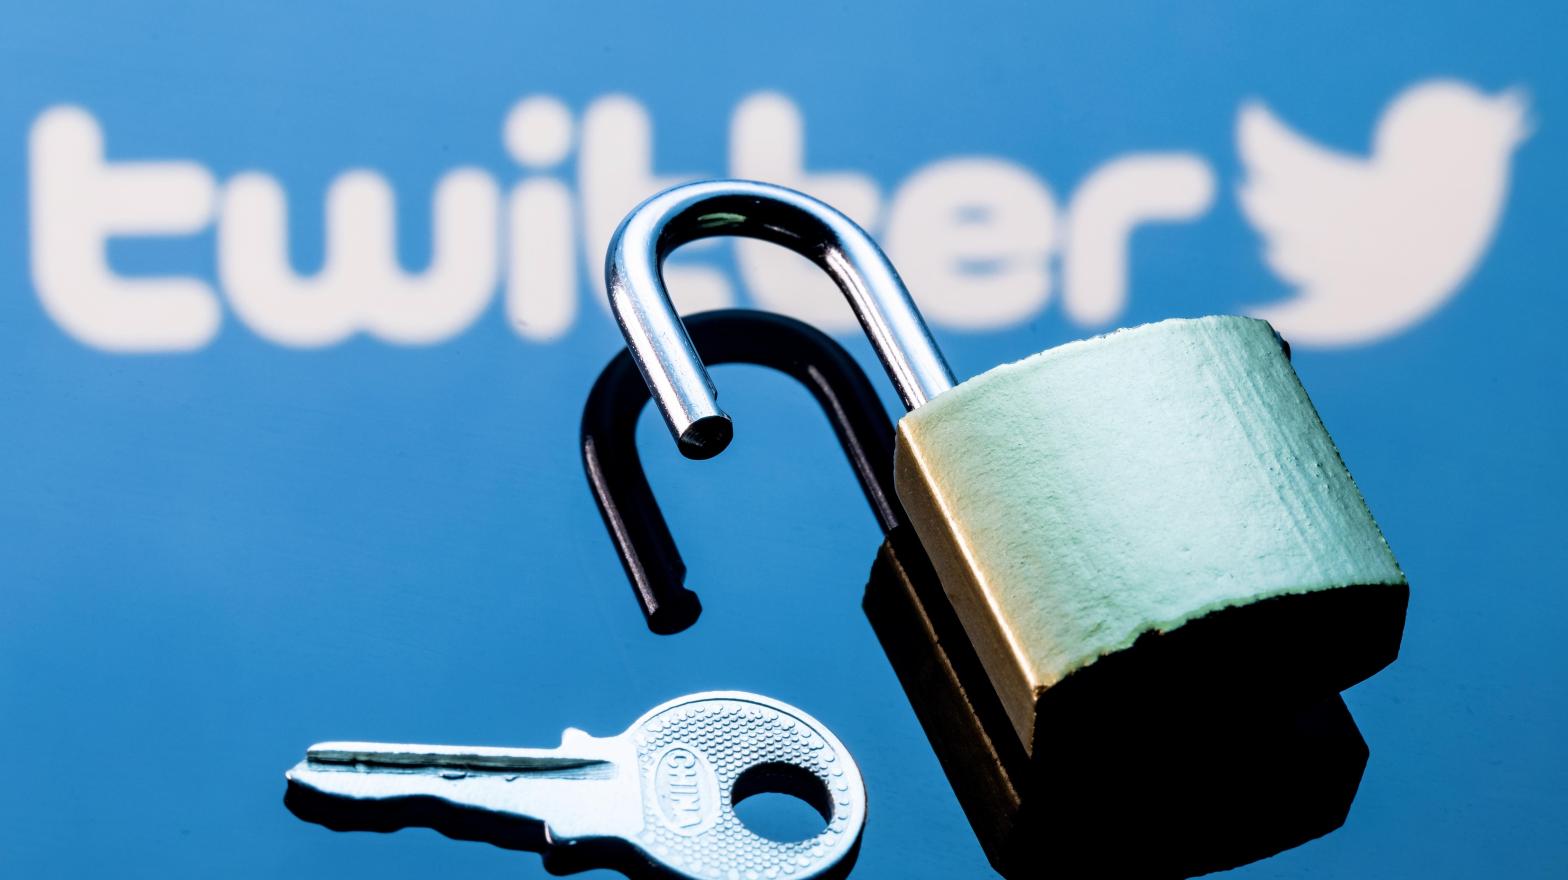 Twitter's security flaw that allowed hackers to steal millions of user records had been patched in August this year, but that hasn't stopped hackers from releasing that data for free online. (Photo: Sergei Elagin, Shutterstock)